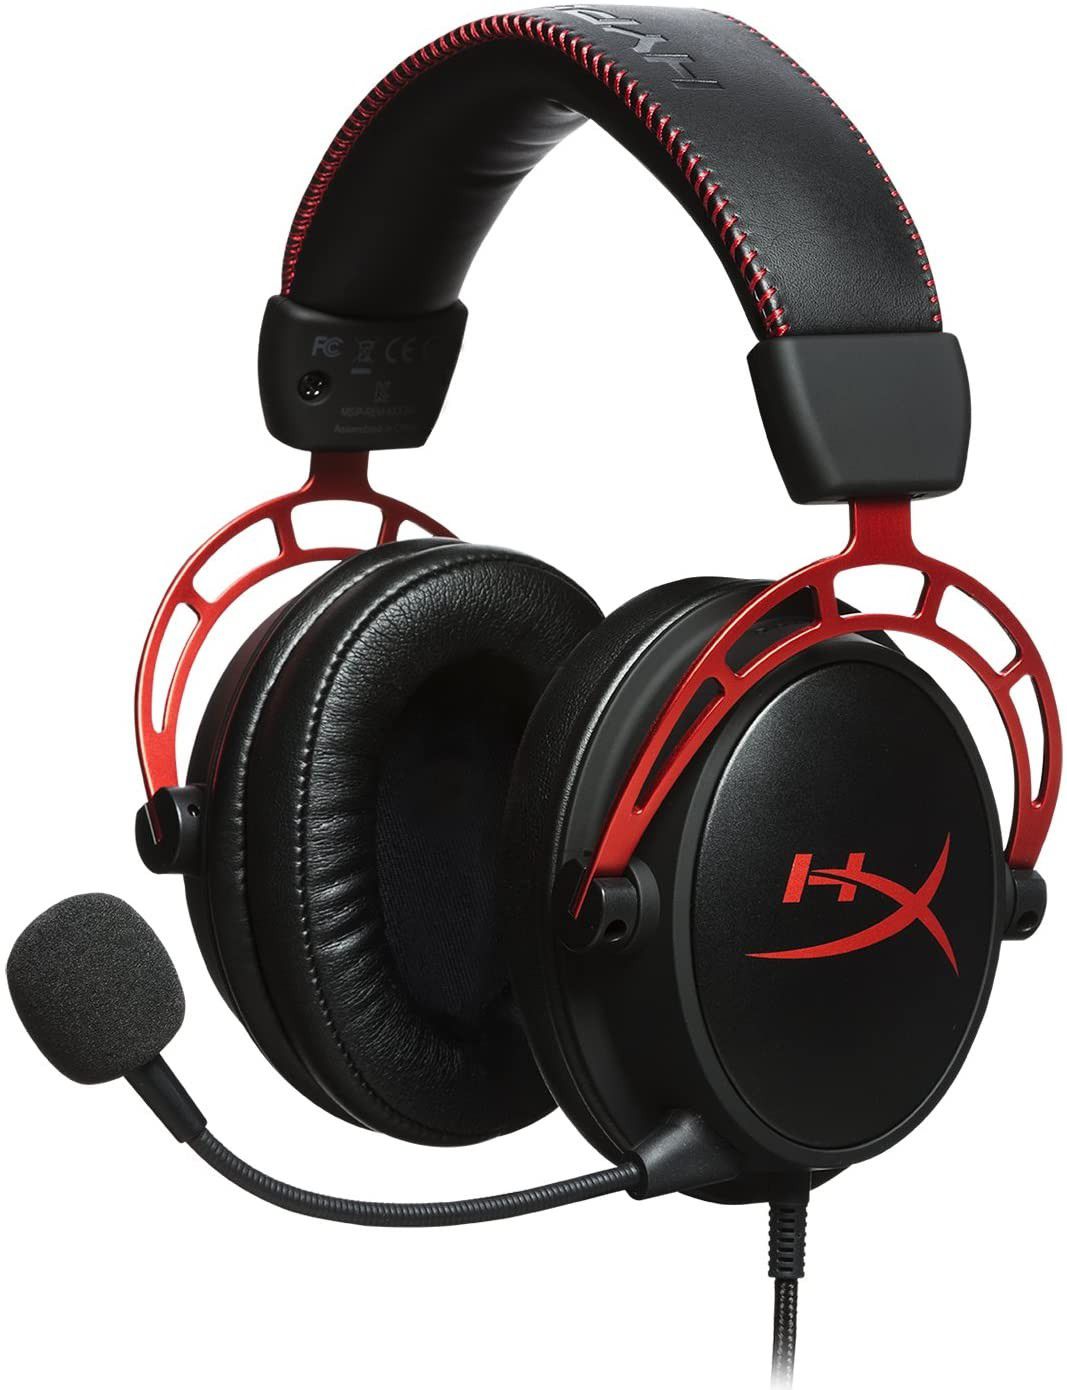 Headphones for Gaming with Microphone